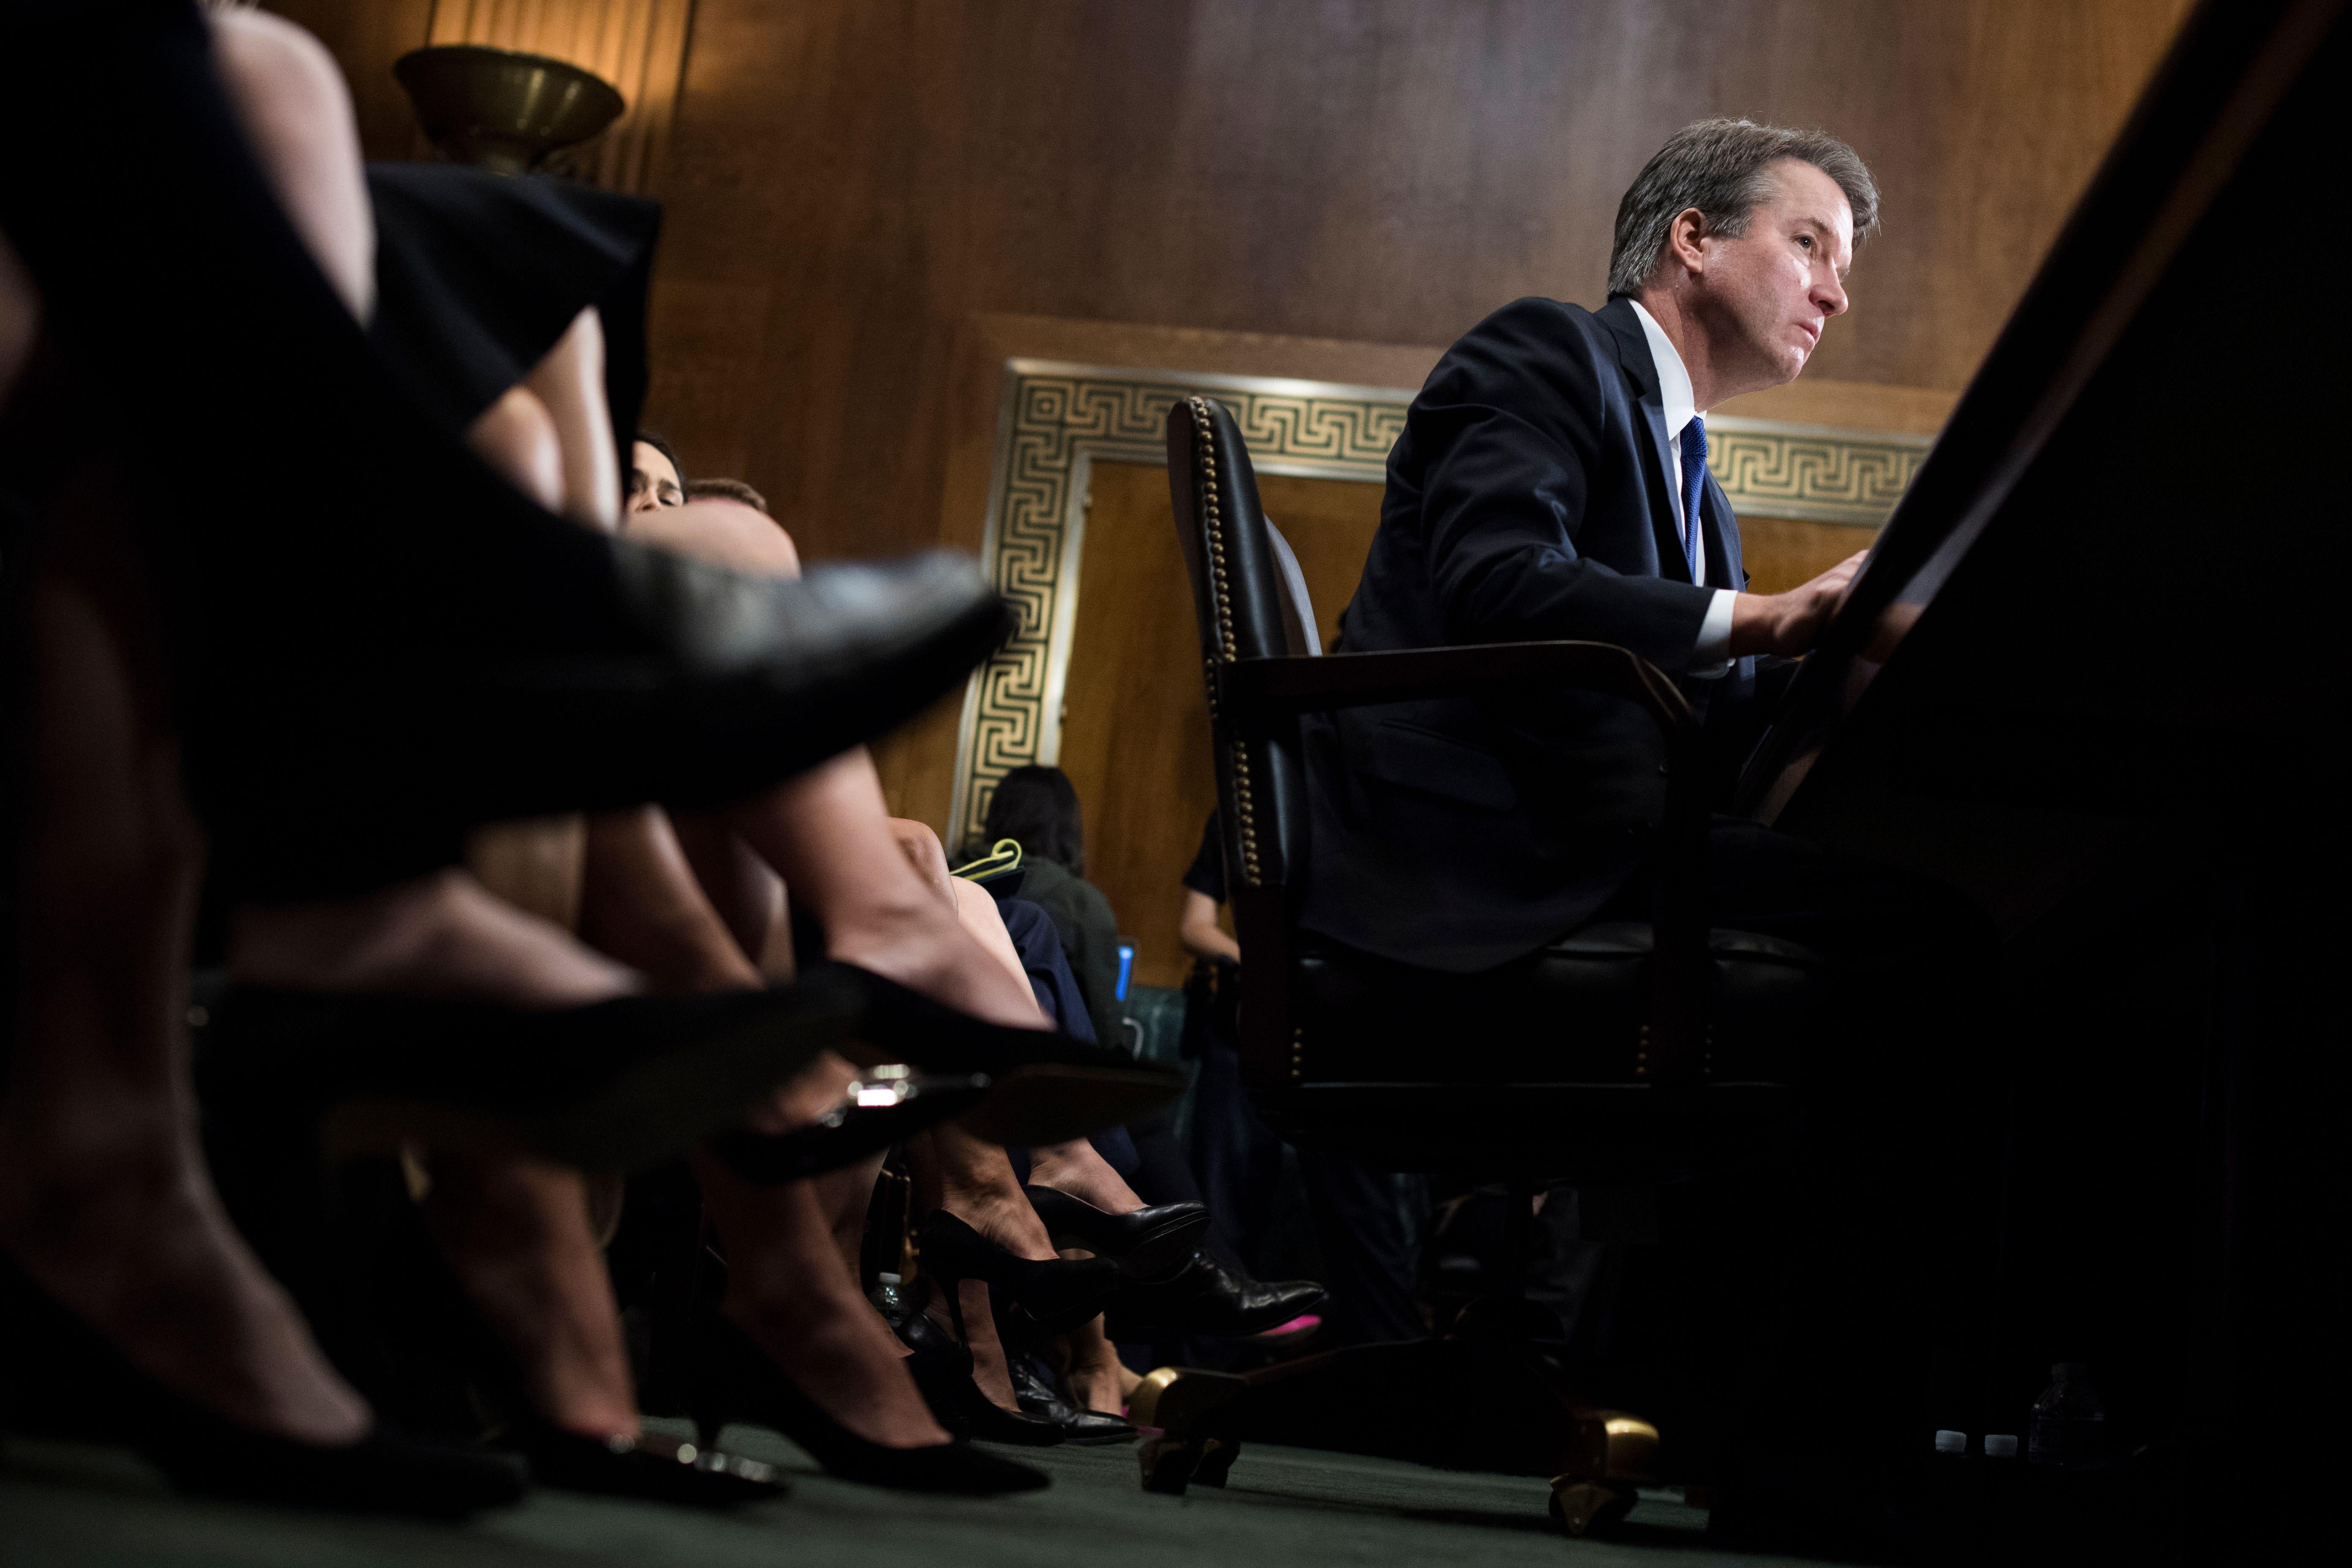 Supreme court nominee Brett Kavanaugh testifies before the Senate Judiciary Committee on Capitol Hill in Washington on Thursday.